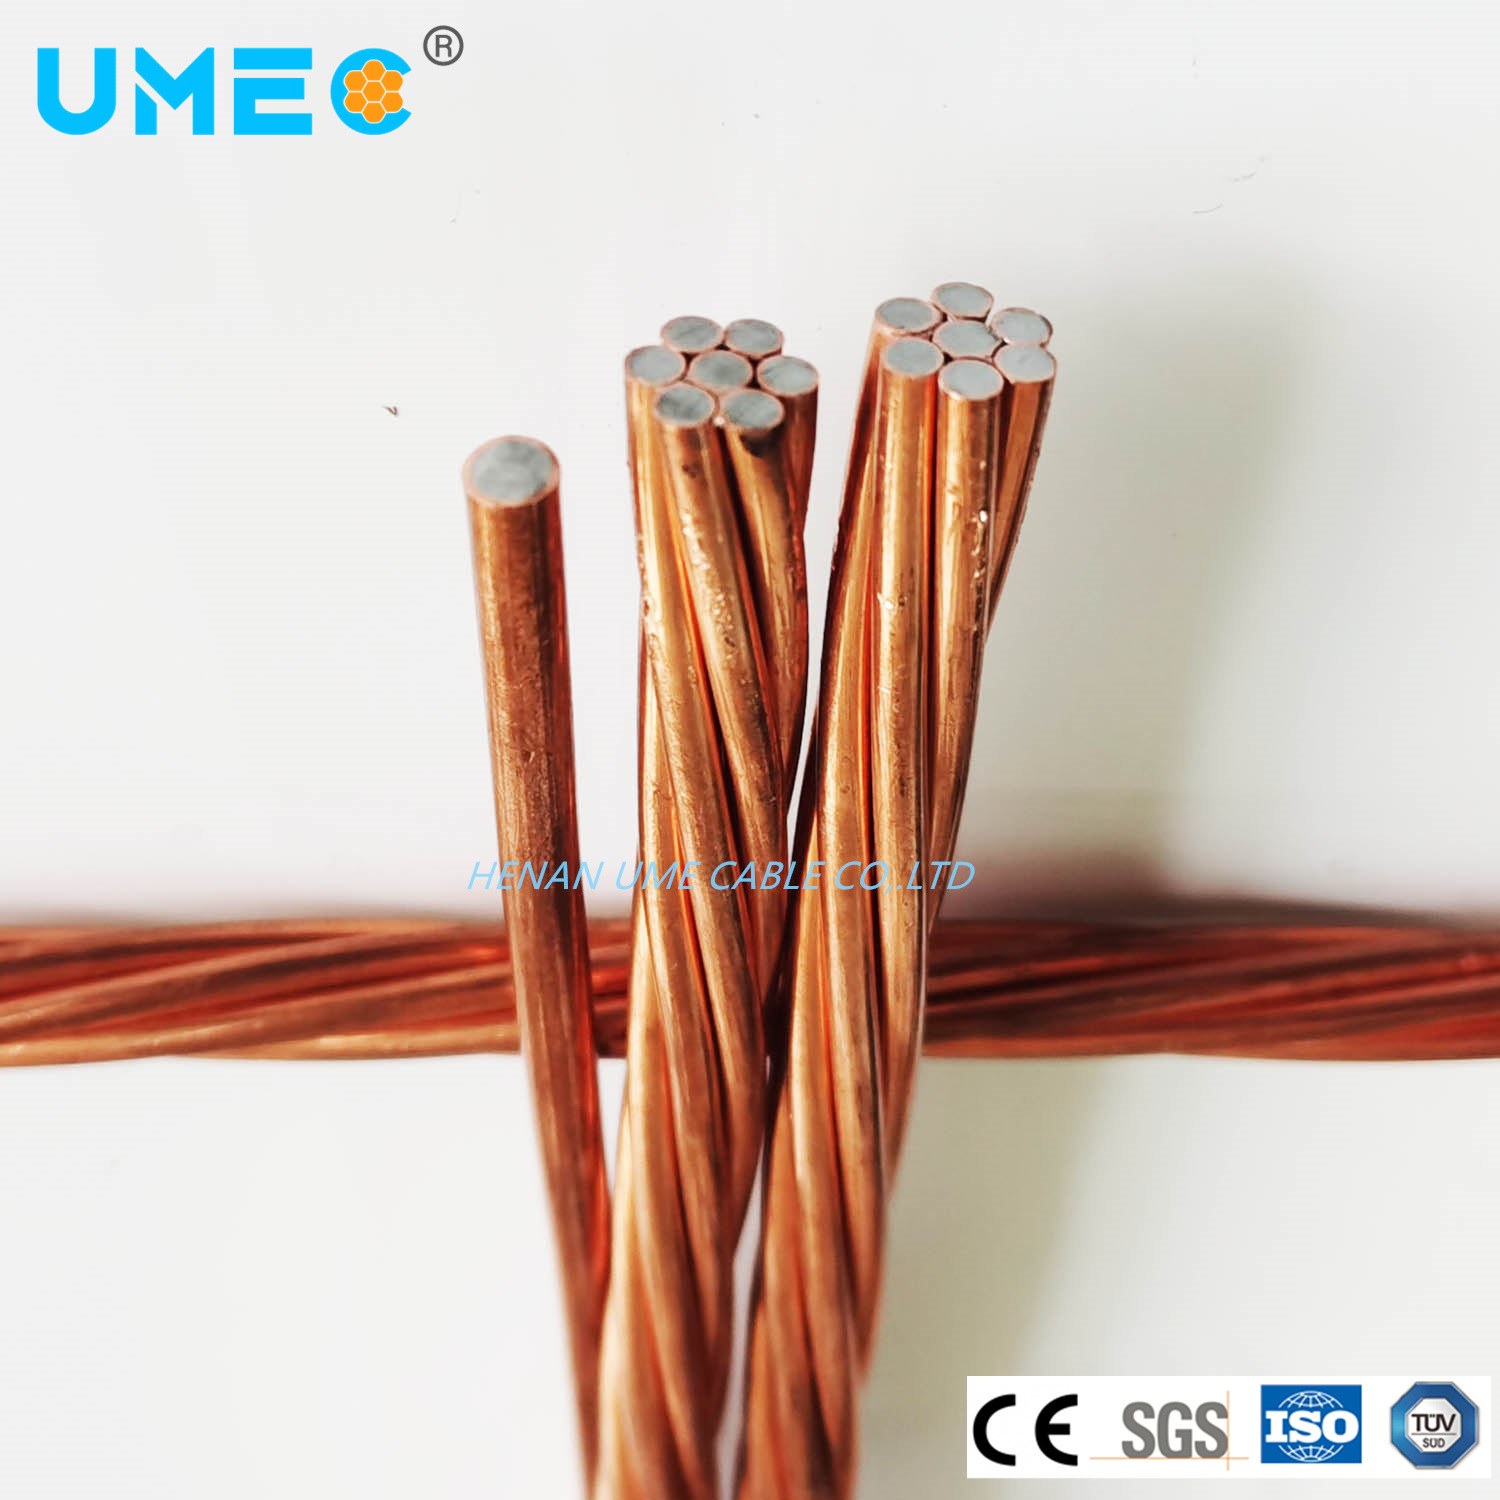 Electric Hard Drawn or Soft Copper Clad Steel Bare CCS (40%) 22AWG 18AWG Electrical CCS